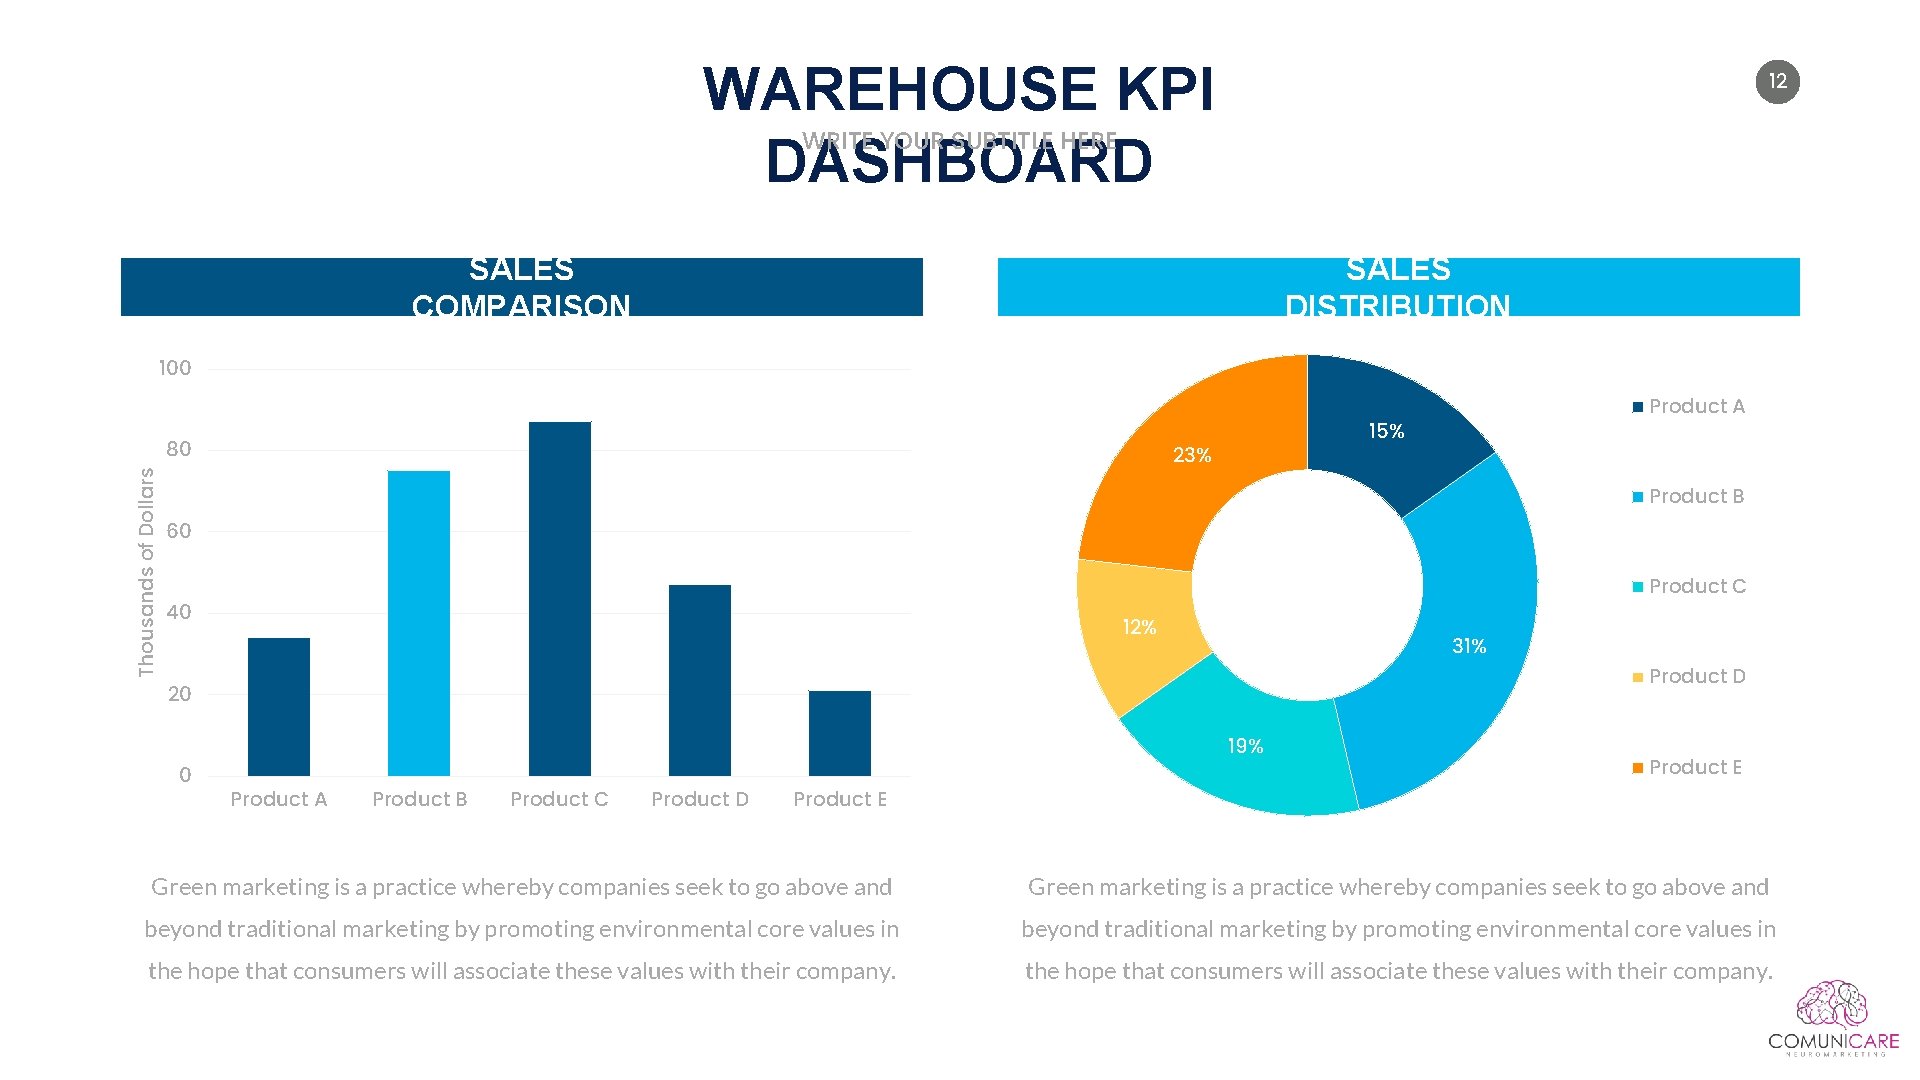 WAREHOUSE KPI DASHBOARD 12 WRITE YOUR SUBTITLE HERE SALES COMPARISON SALES DISTRIBUTION Thousands of